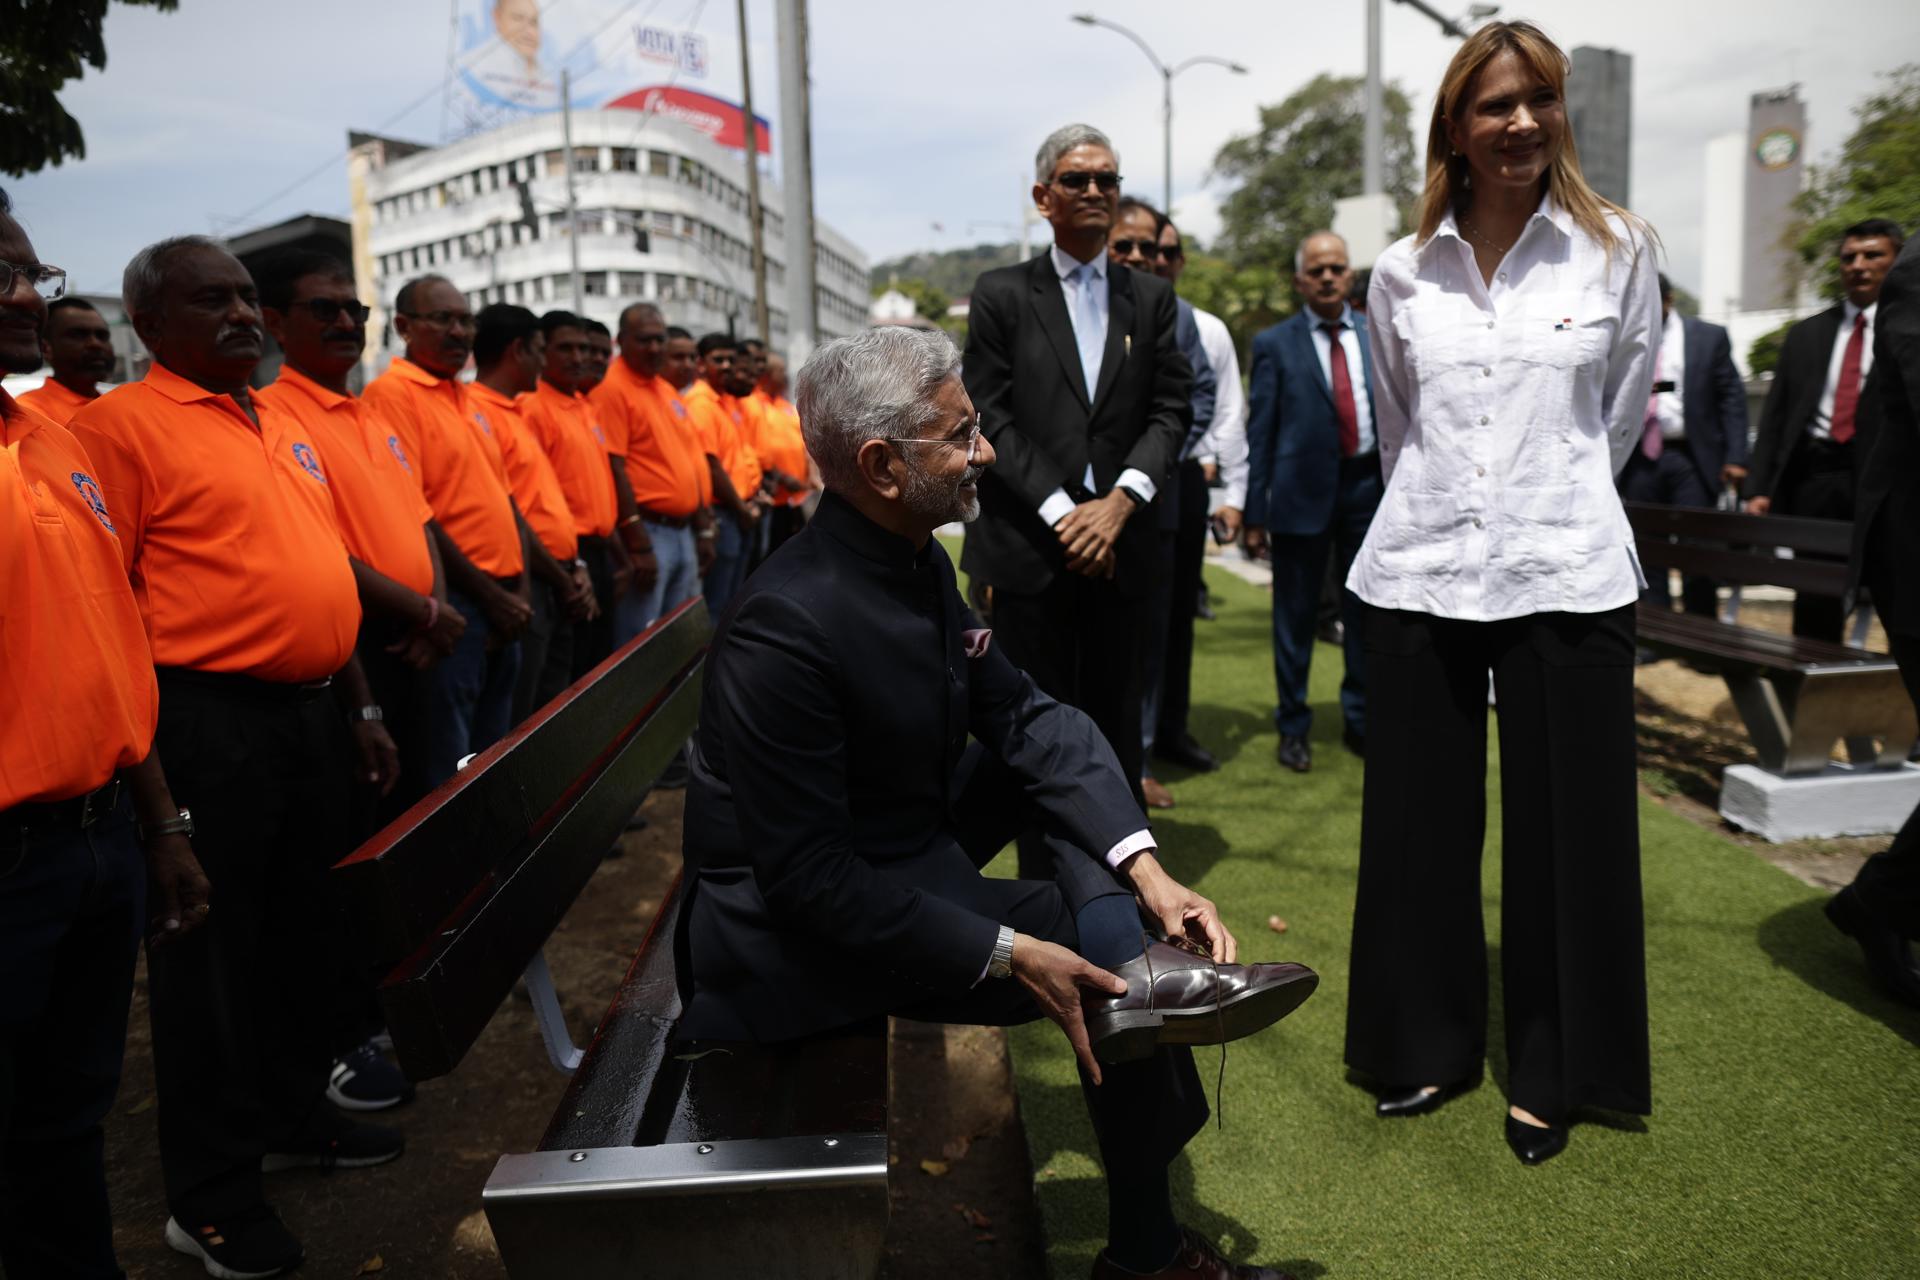 Indian Foreign Minister Subrahmanyam Jaishankar (c) removes his shoes before Panamanian Multilateral Affairs and Cooperation Minister Yill Otero (r) on April 24, 2023, during a visit to the 1,000 Days Park in Panama City. EFE/ Bienvenido Velasco